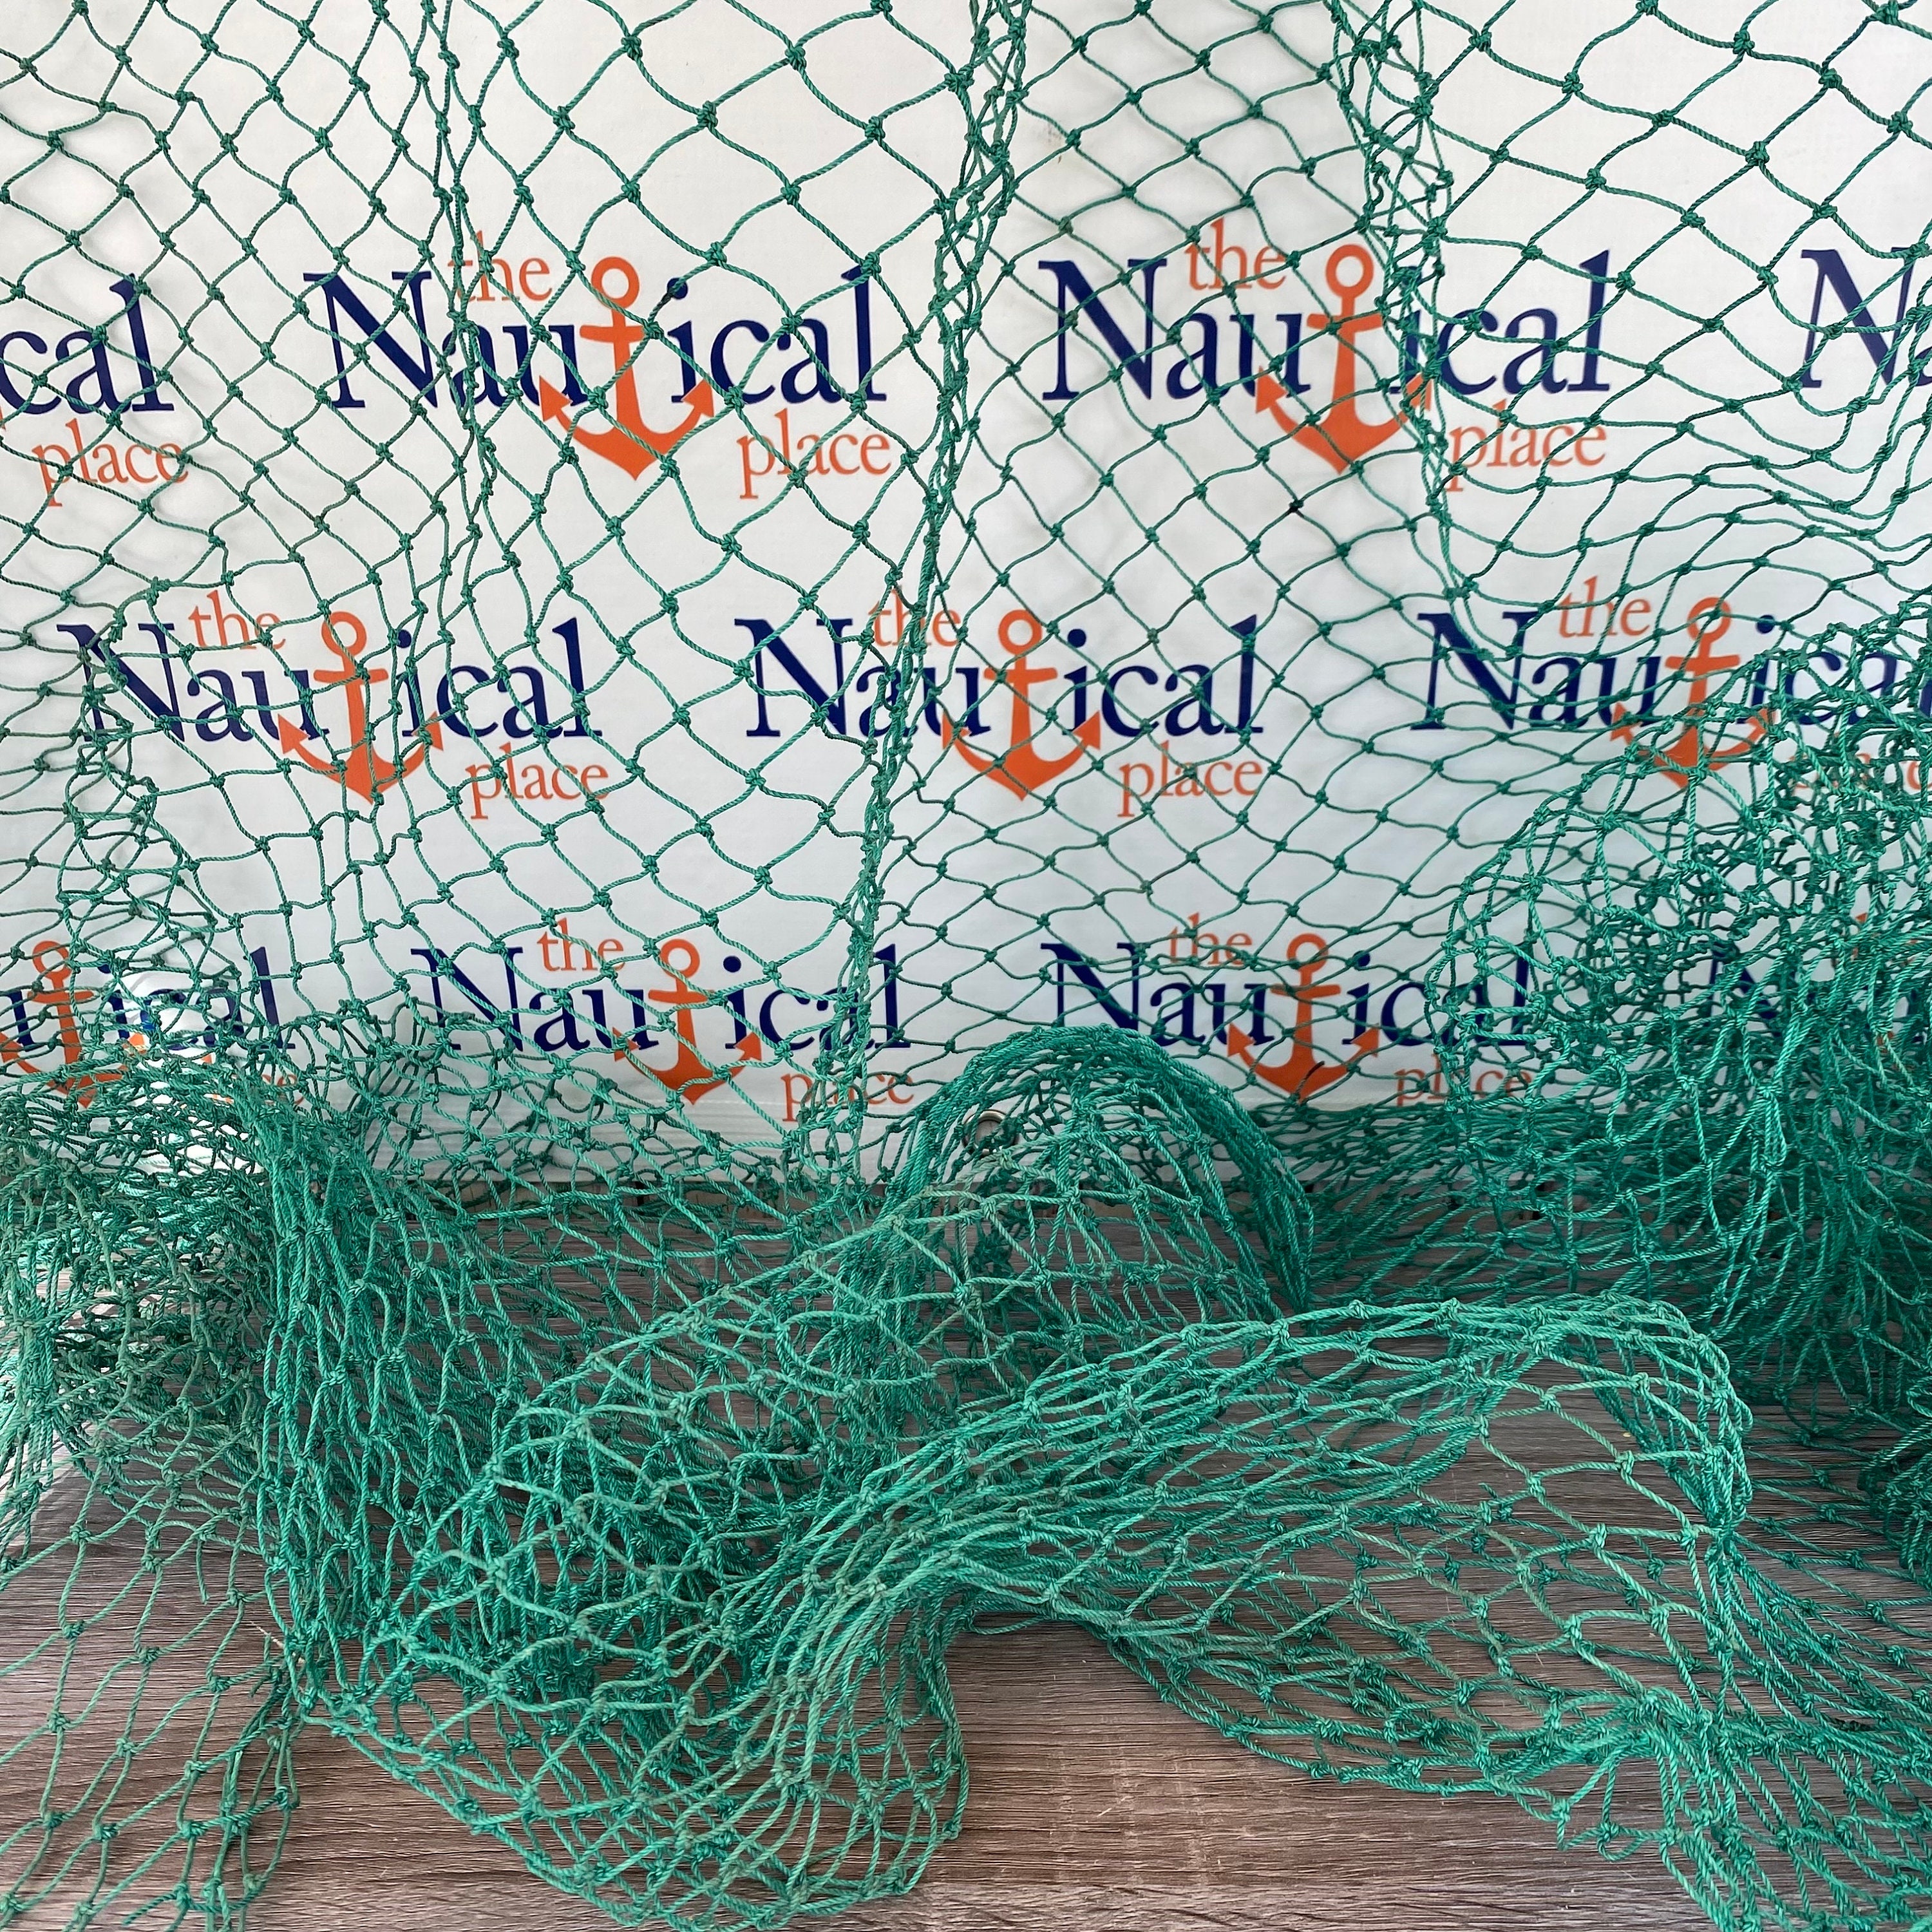 Decorative Green Fish Net - 5 ft x 8 ft Knotted - New Commercial